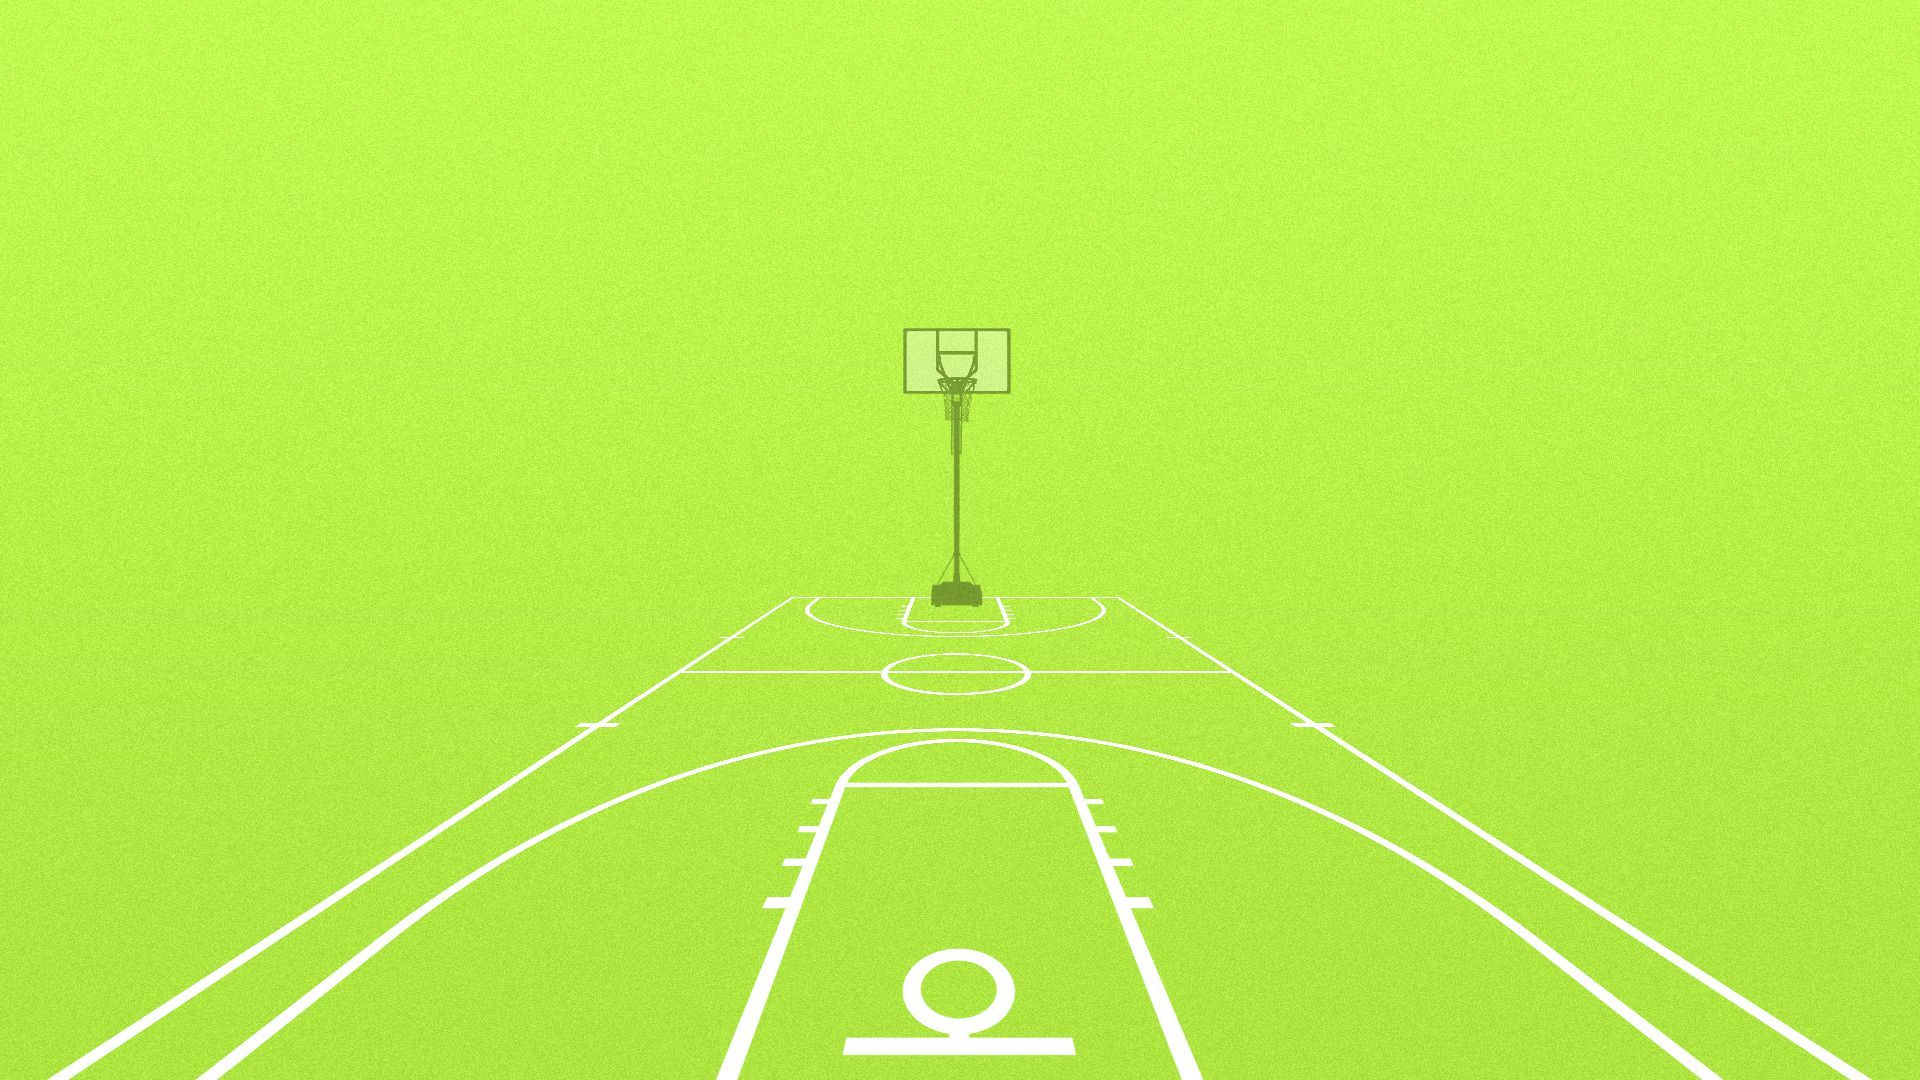 Illustration of a basketball hoop that's very far away